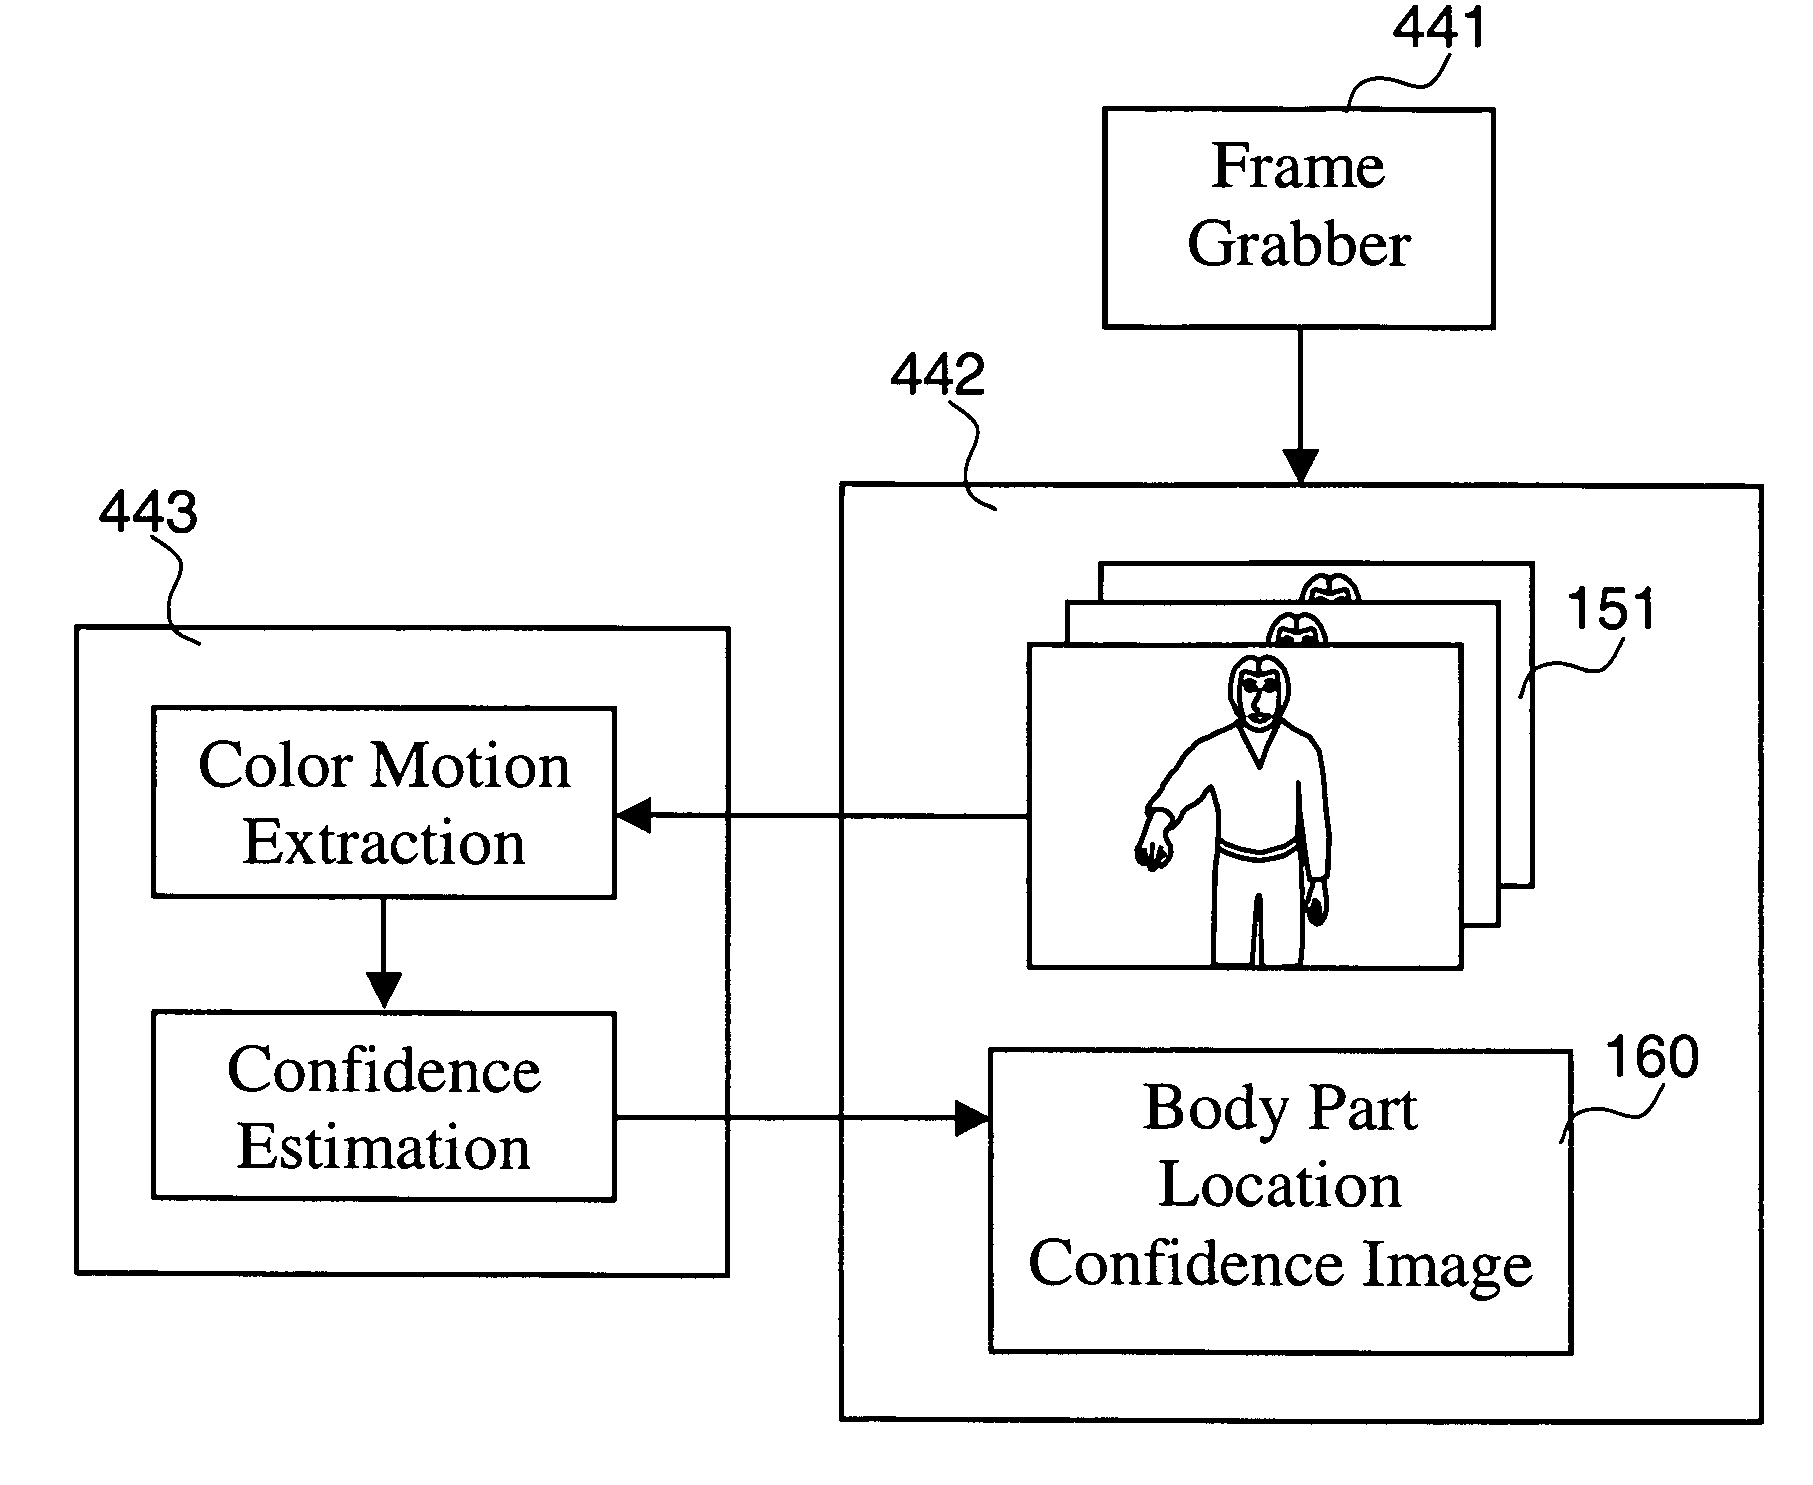 Method and system for detecting conscious hand movement patterns and computer-generated visual feedback for facilitating human-computer interaction